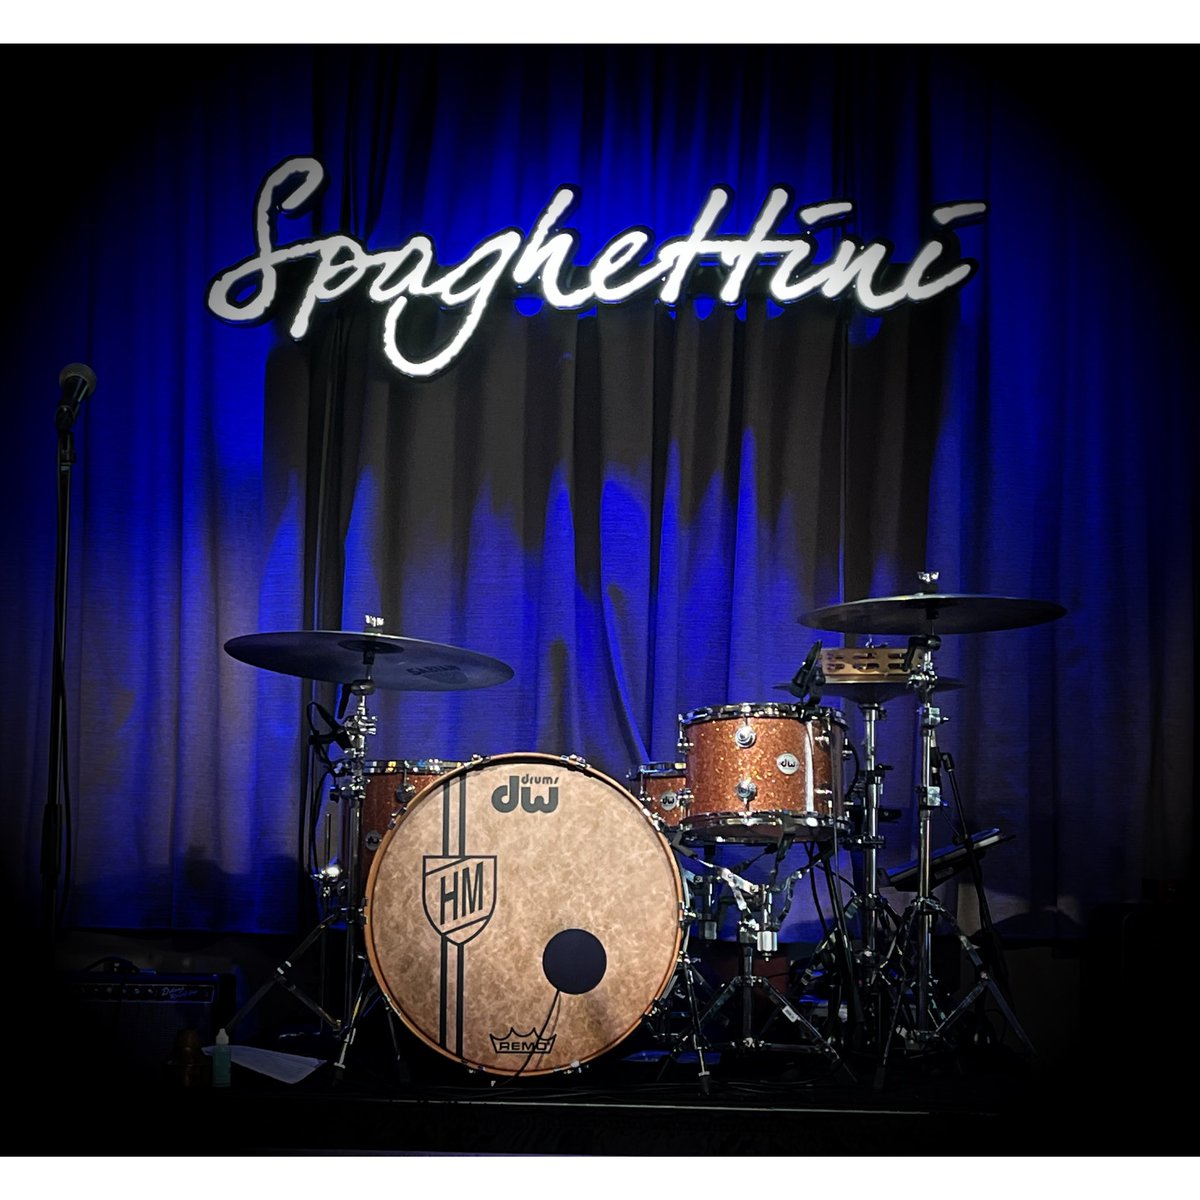 Another great night at Spaghettini, with Greg Adams & East Bay Soul! 
#dw #remo #teamremo #SABIANCymbals #SABIANFamily #PlayYourWay #innovativepercussion